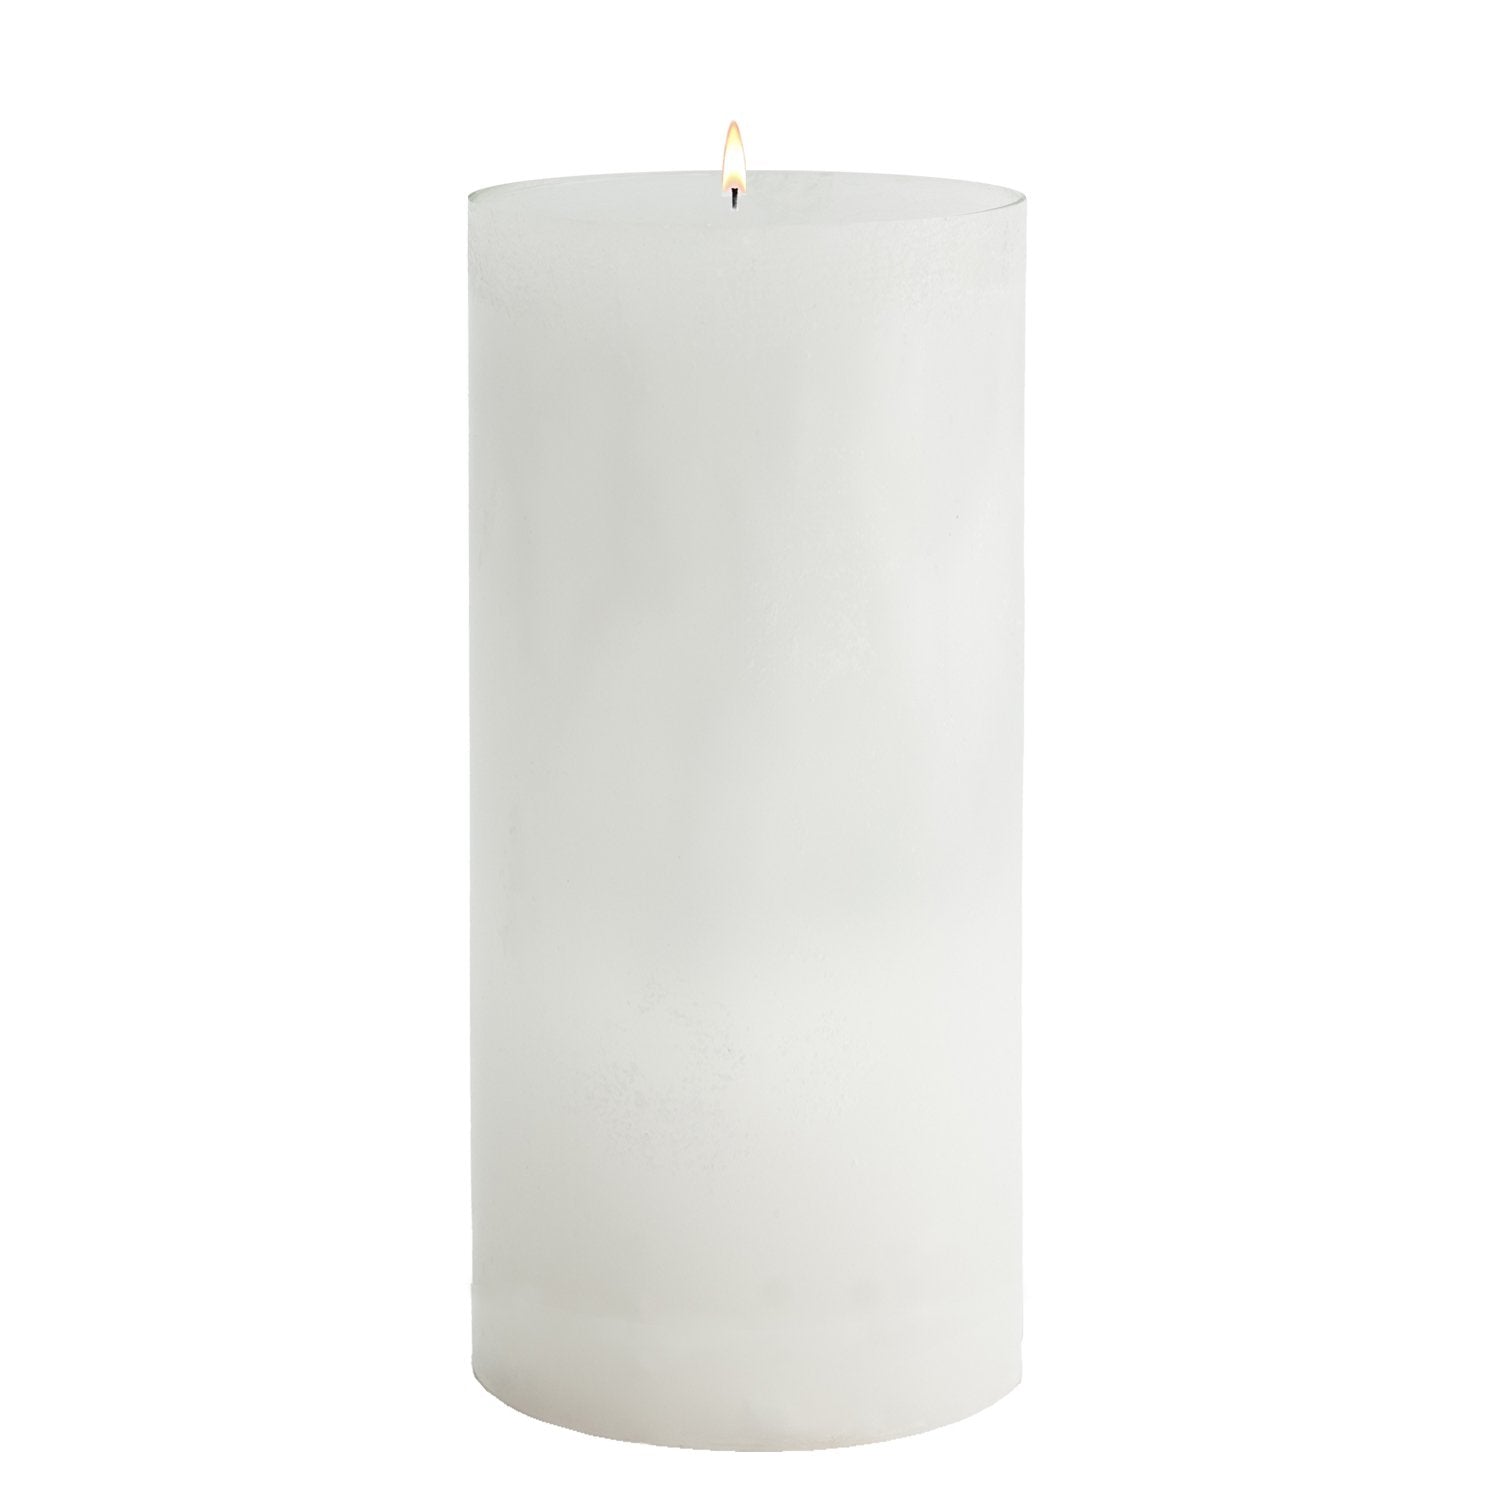 Stone Candles Unscented Pillar White 4x9